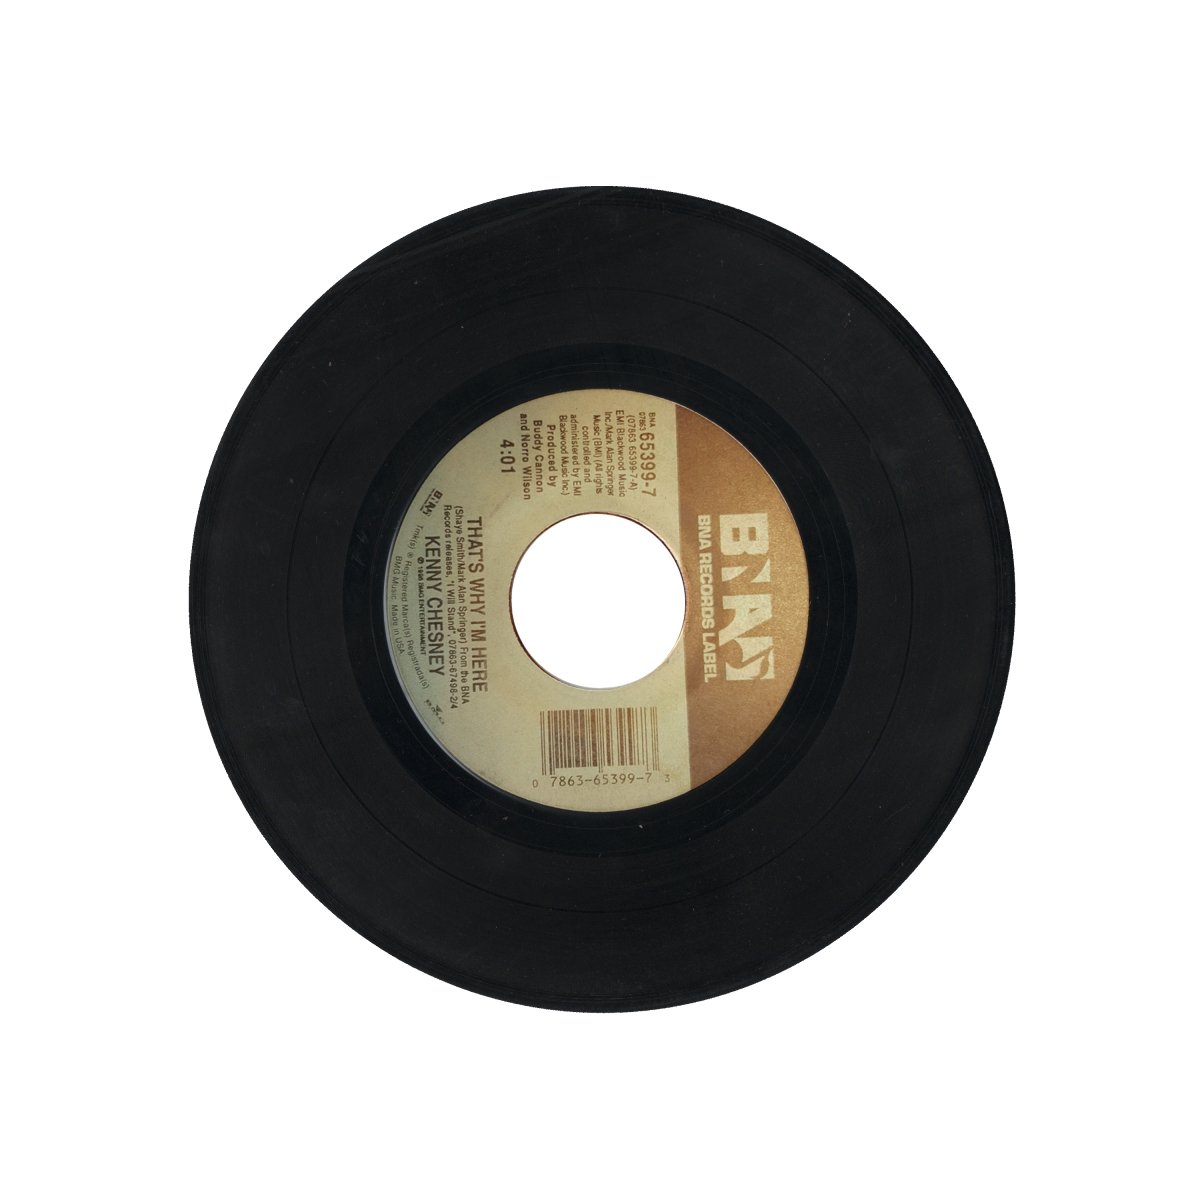 Kenny Chesney - That's Why I'm Here / A Chance 7" Vinyl